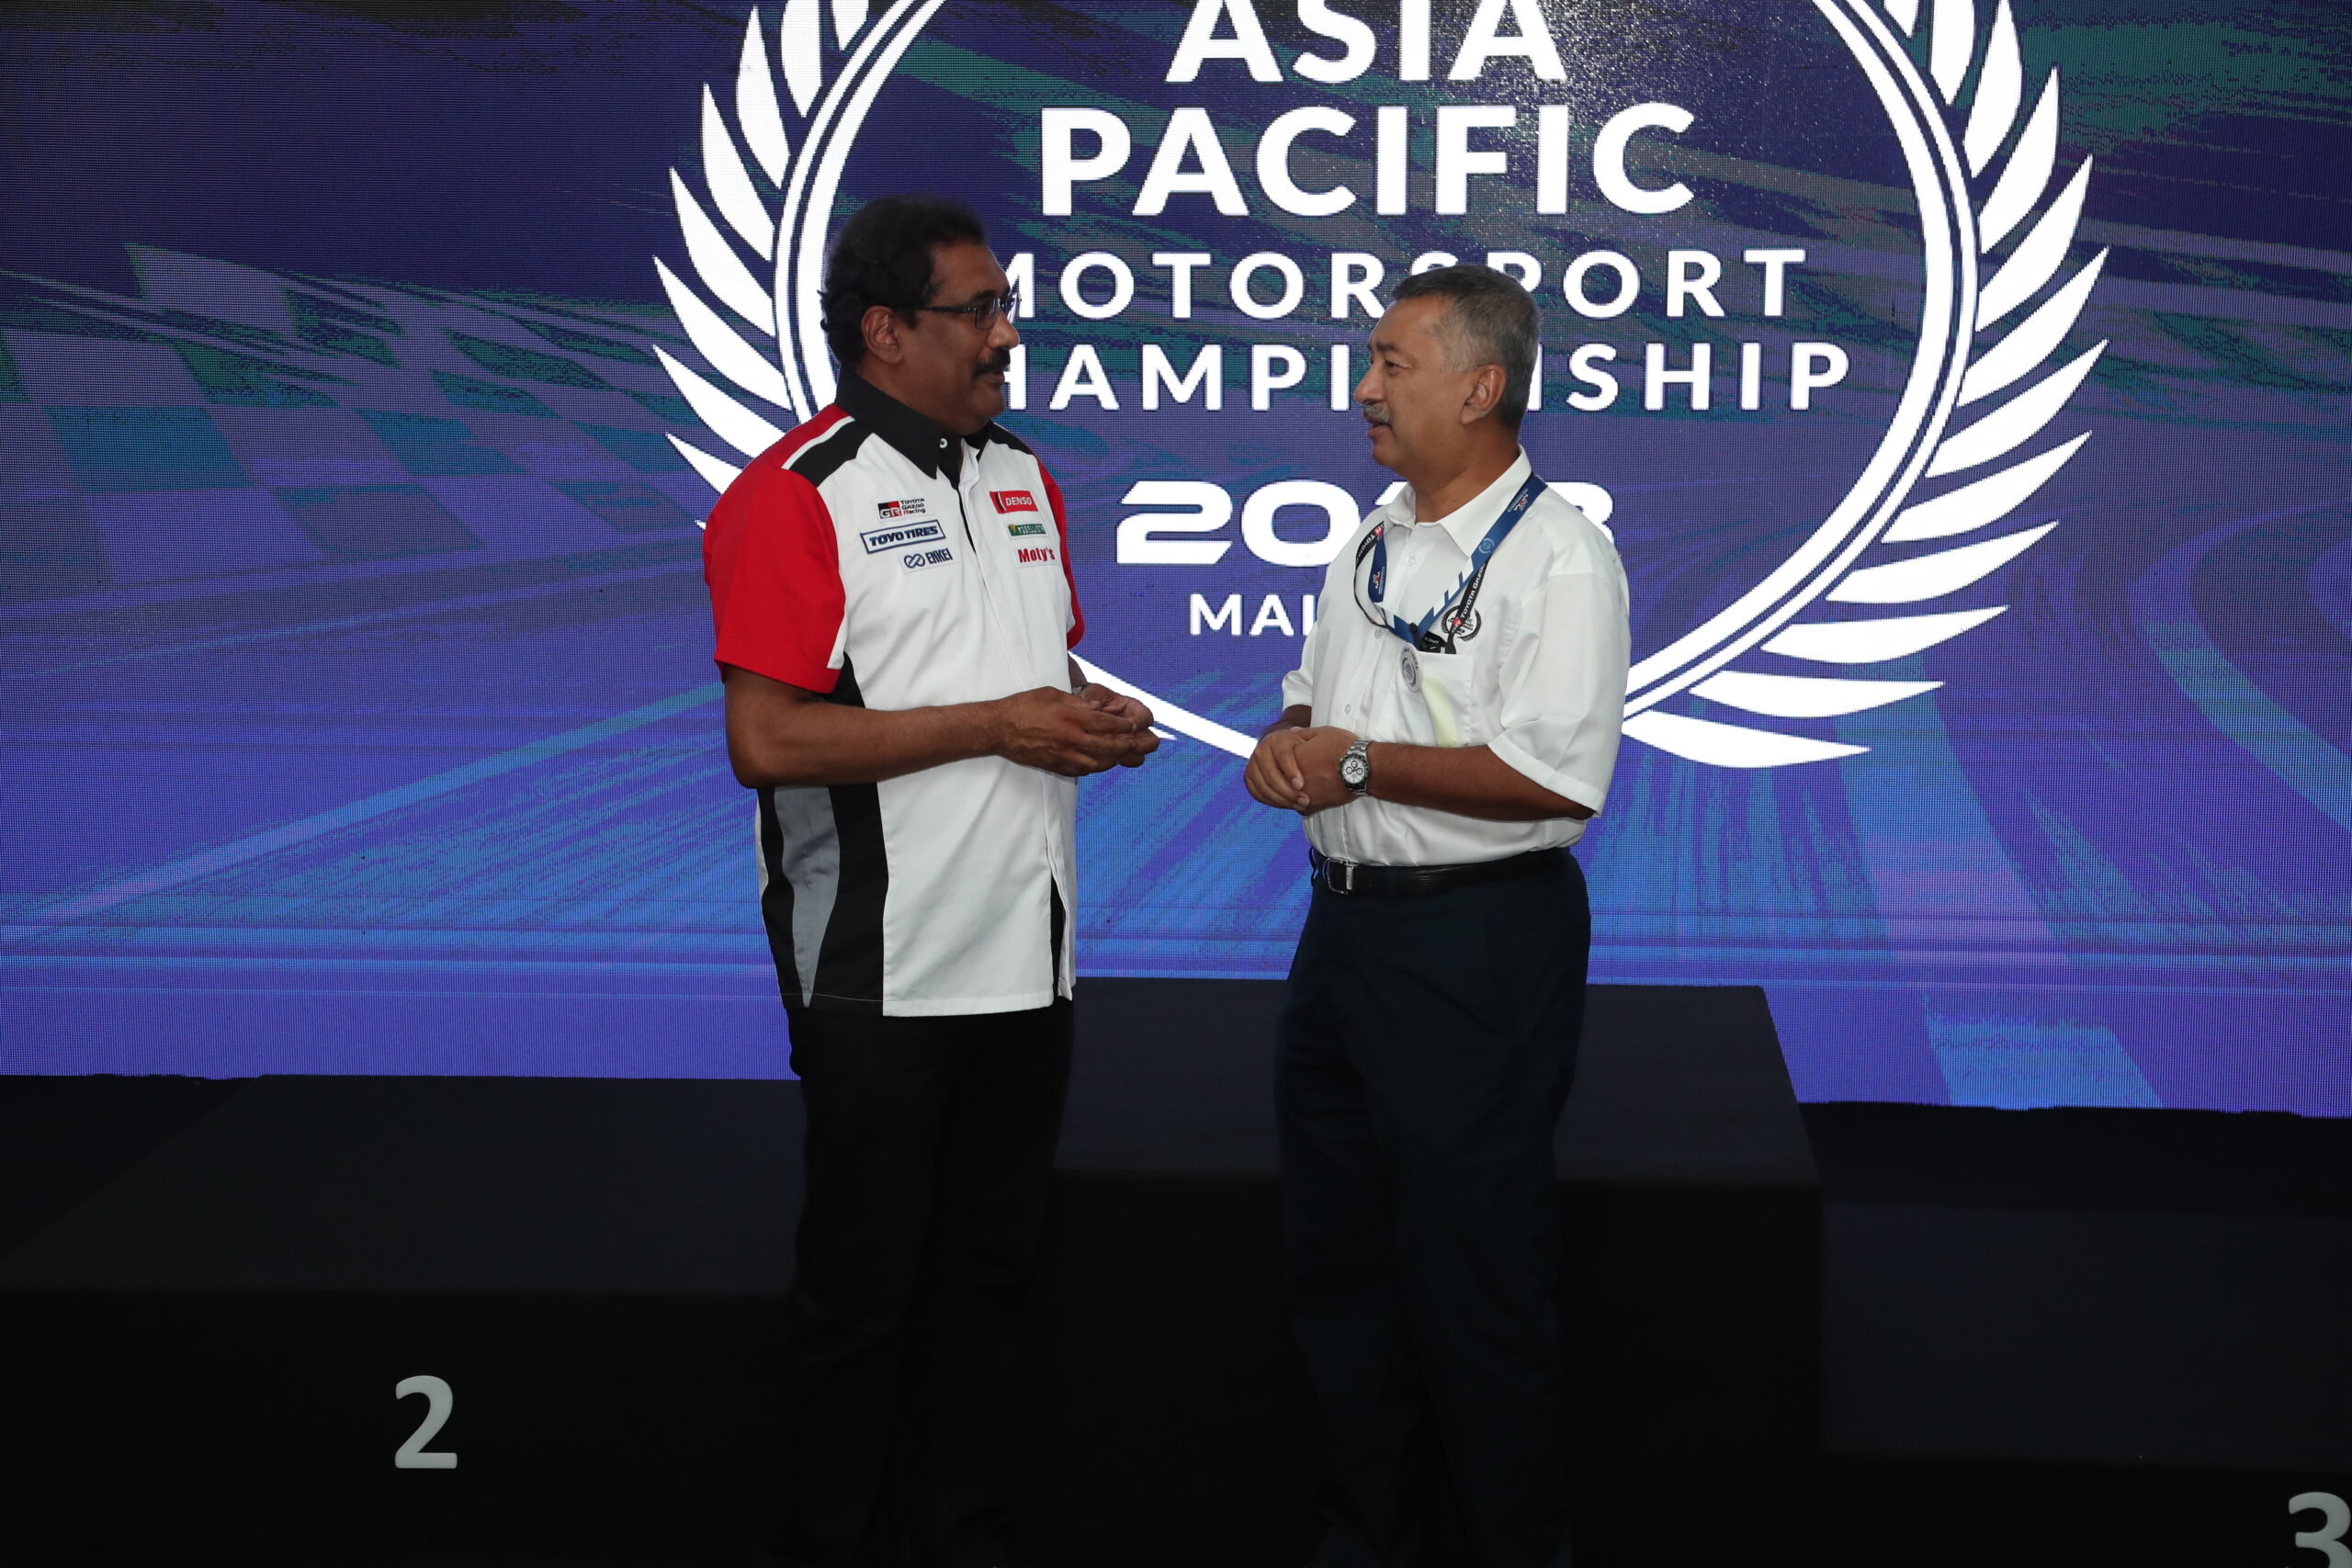 UMW Toyota Motor Sdn Bhd was today honored with an award from the Motorsports Association of Malaysia (MAM)